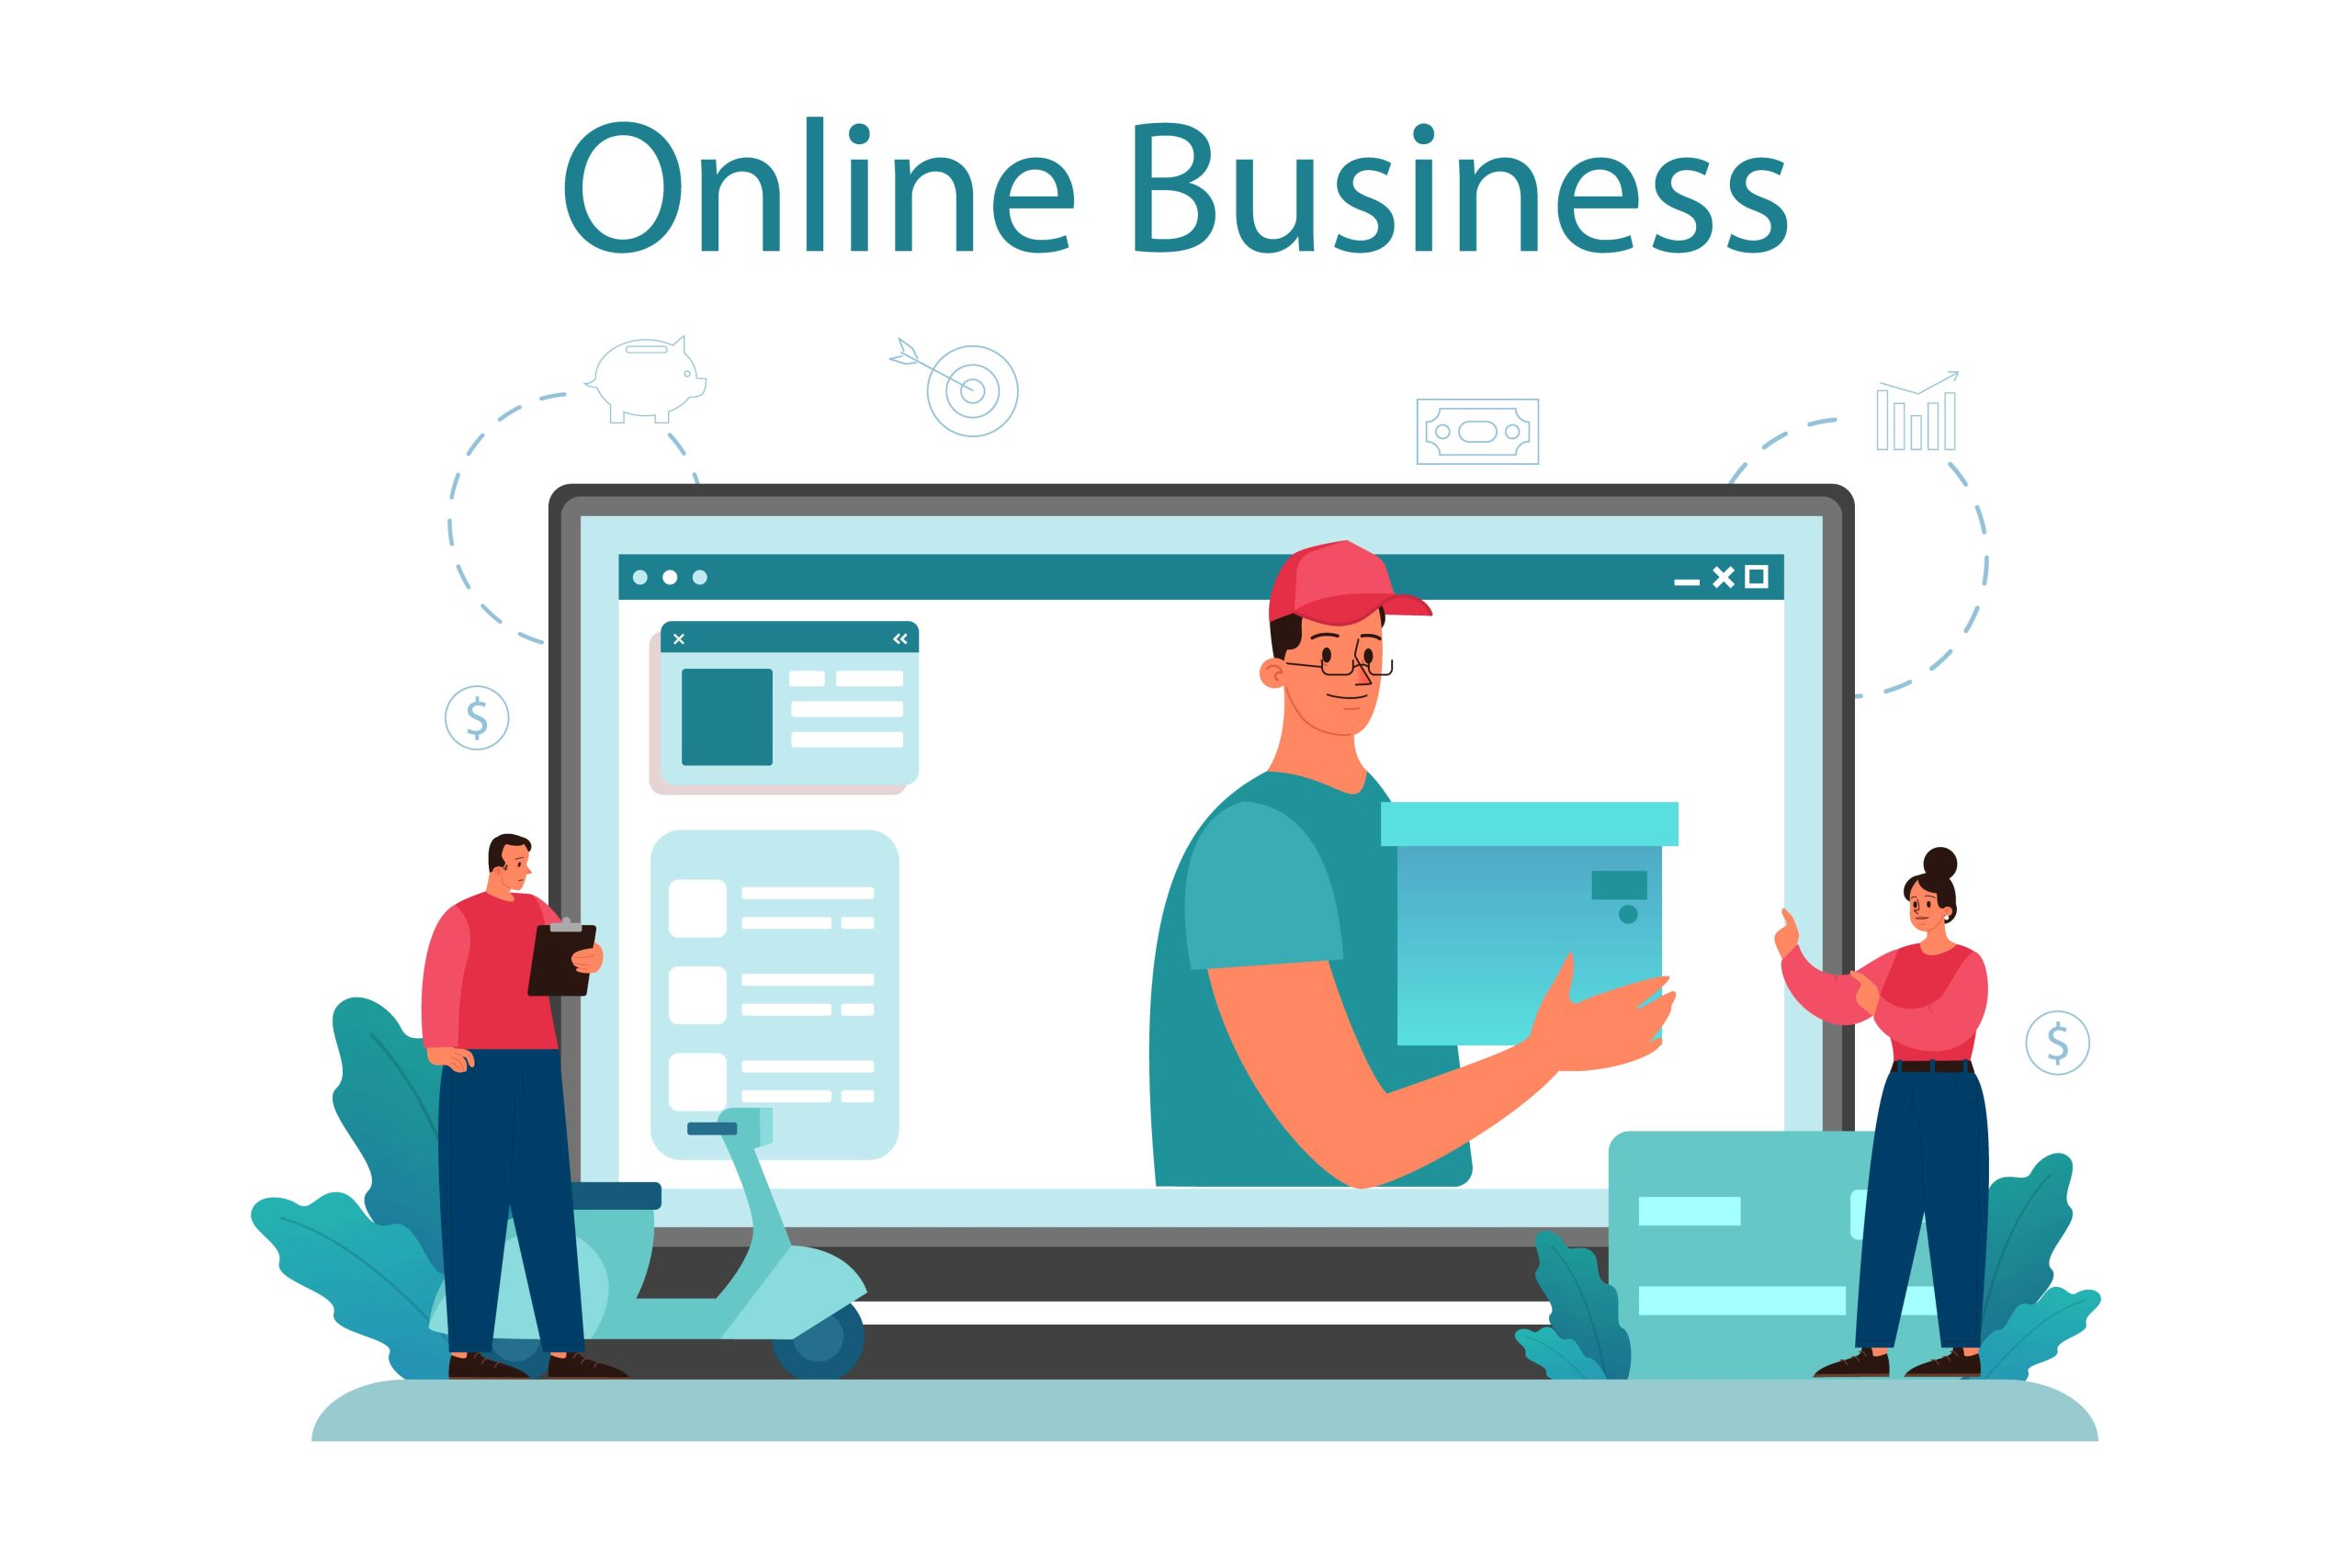 Tips to Grow Online Business